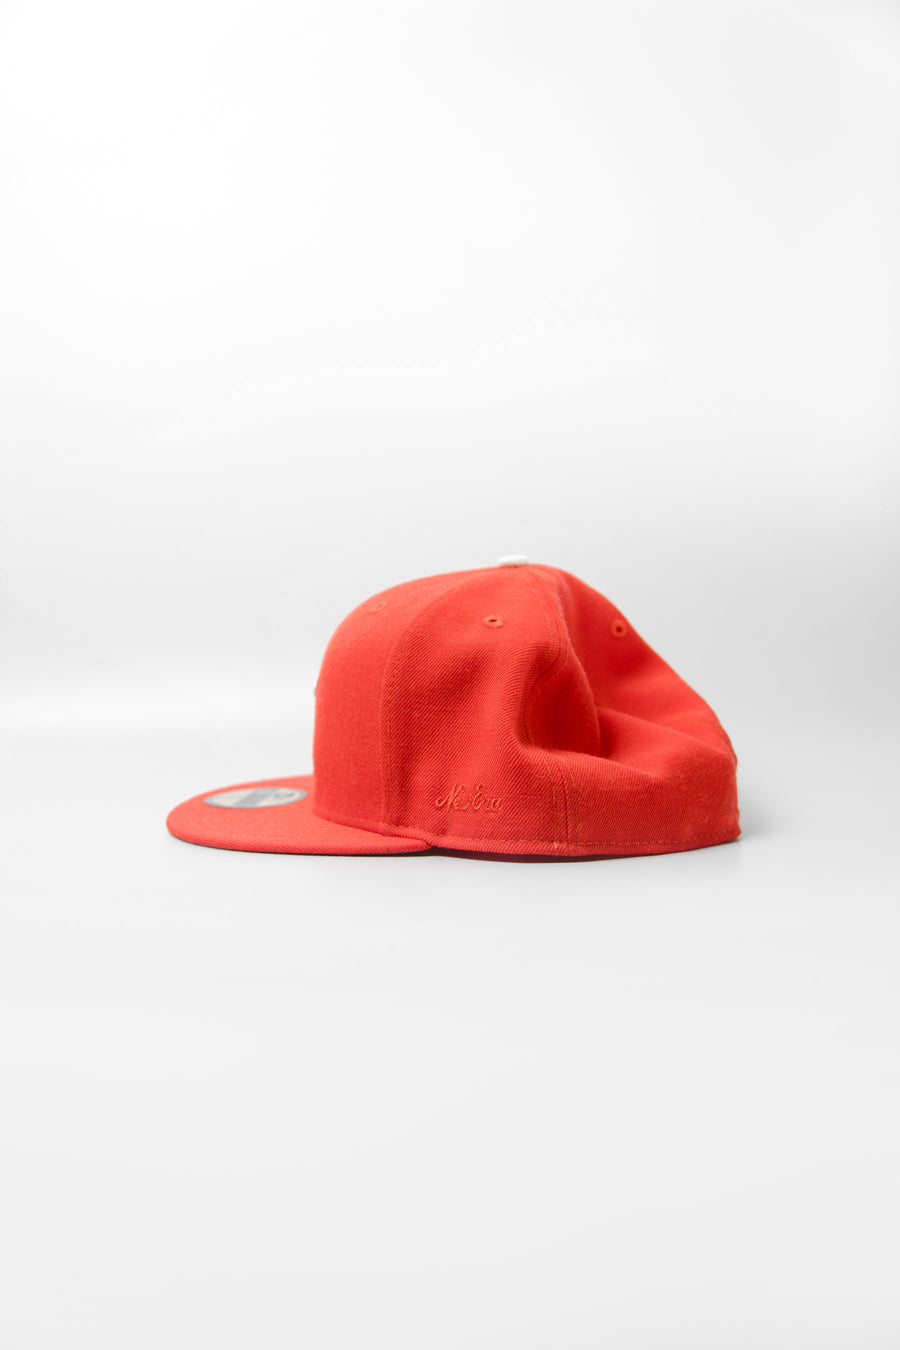 59FIFTY Fitted Cap Orange (LAUNCH PRODUCT)